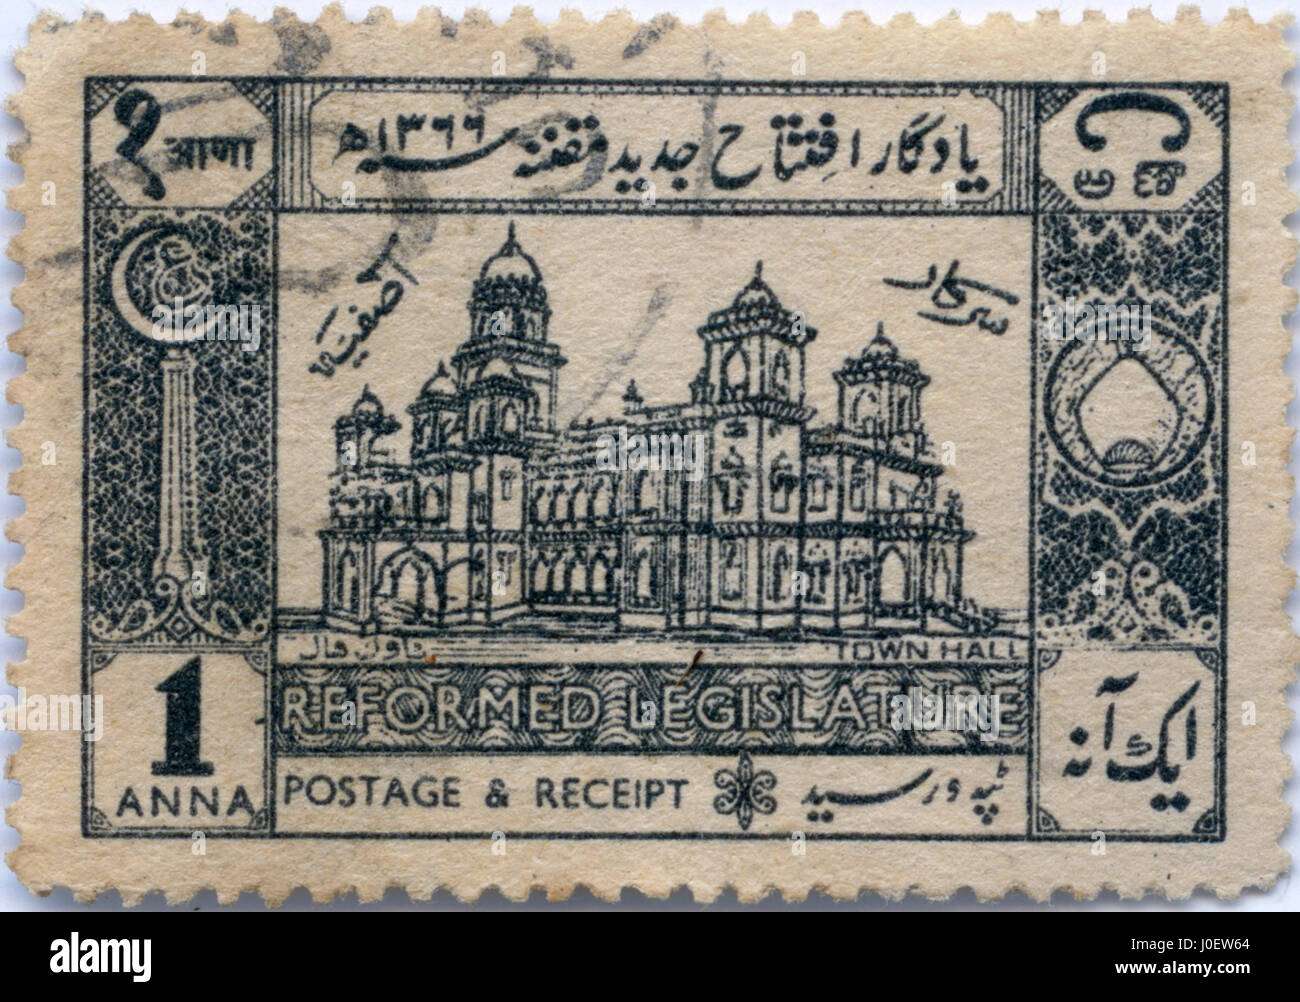 1an reformed legislature town hall, stamps, india, asia Stock Photo